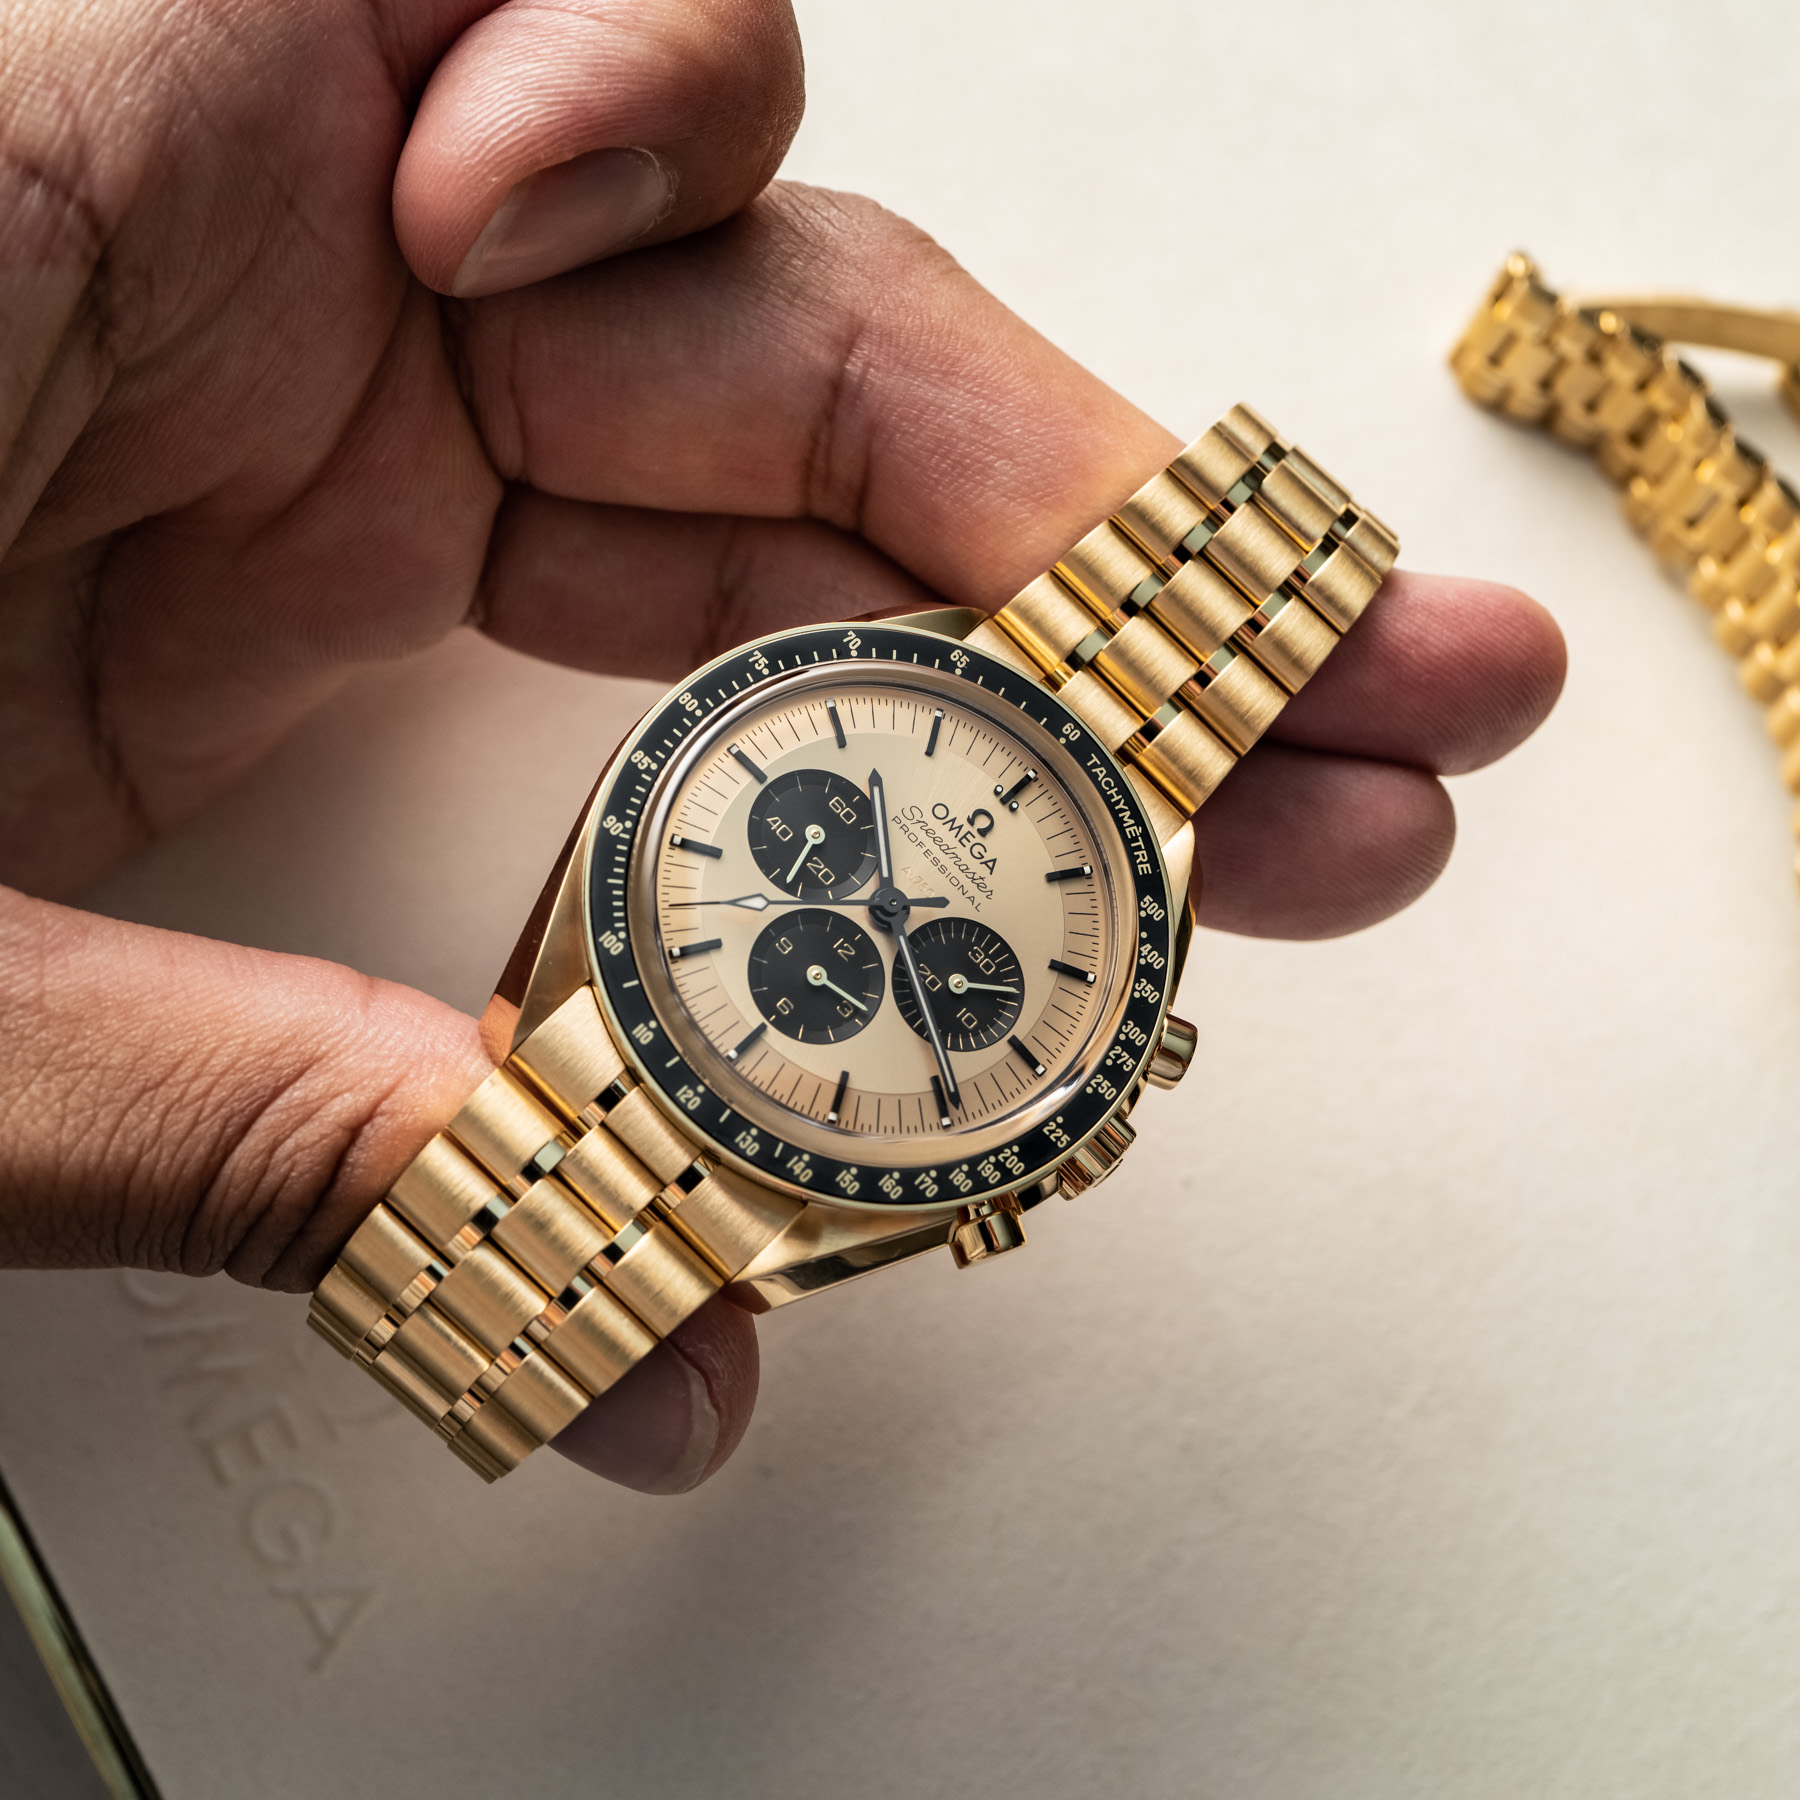 OMEGA Speedmaster Moonwatch Professional Chronograph 42 MM Review